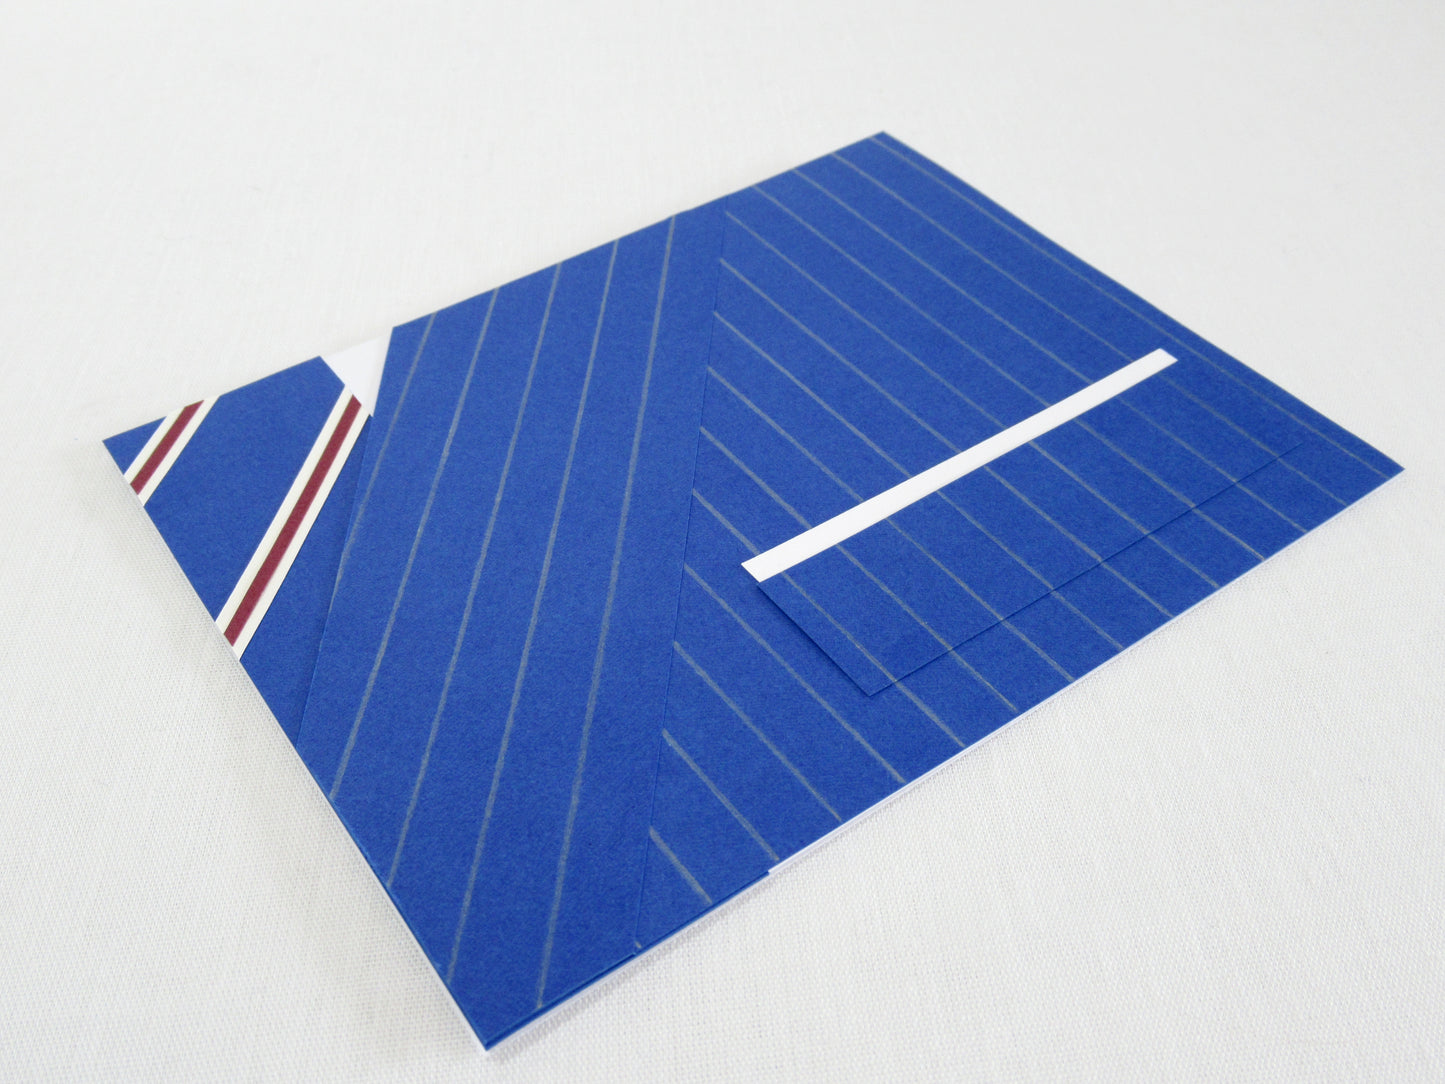 A card lays at an angle on a white desk. The front of the card looks like a portion of person's suit, blue pinstripes, white pocket square, and a blue striped tie. It's designed to look like an outfit worn by Harry Hart in the movie Kingsman: The Secret Service.